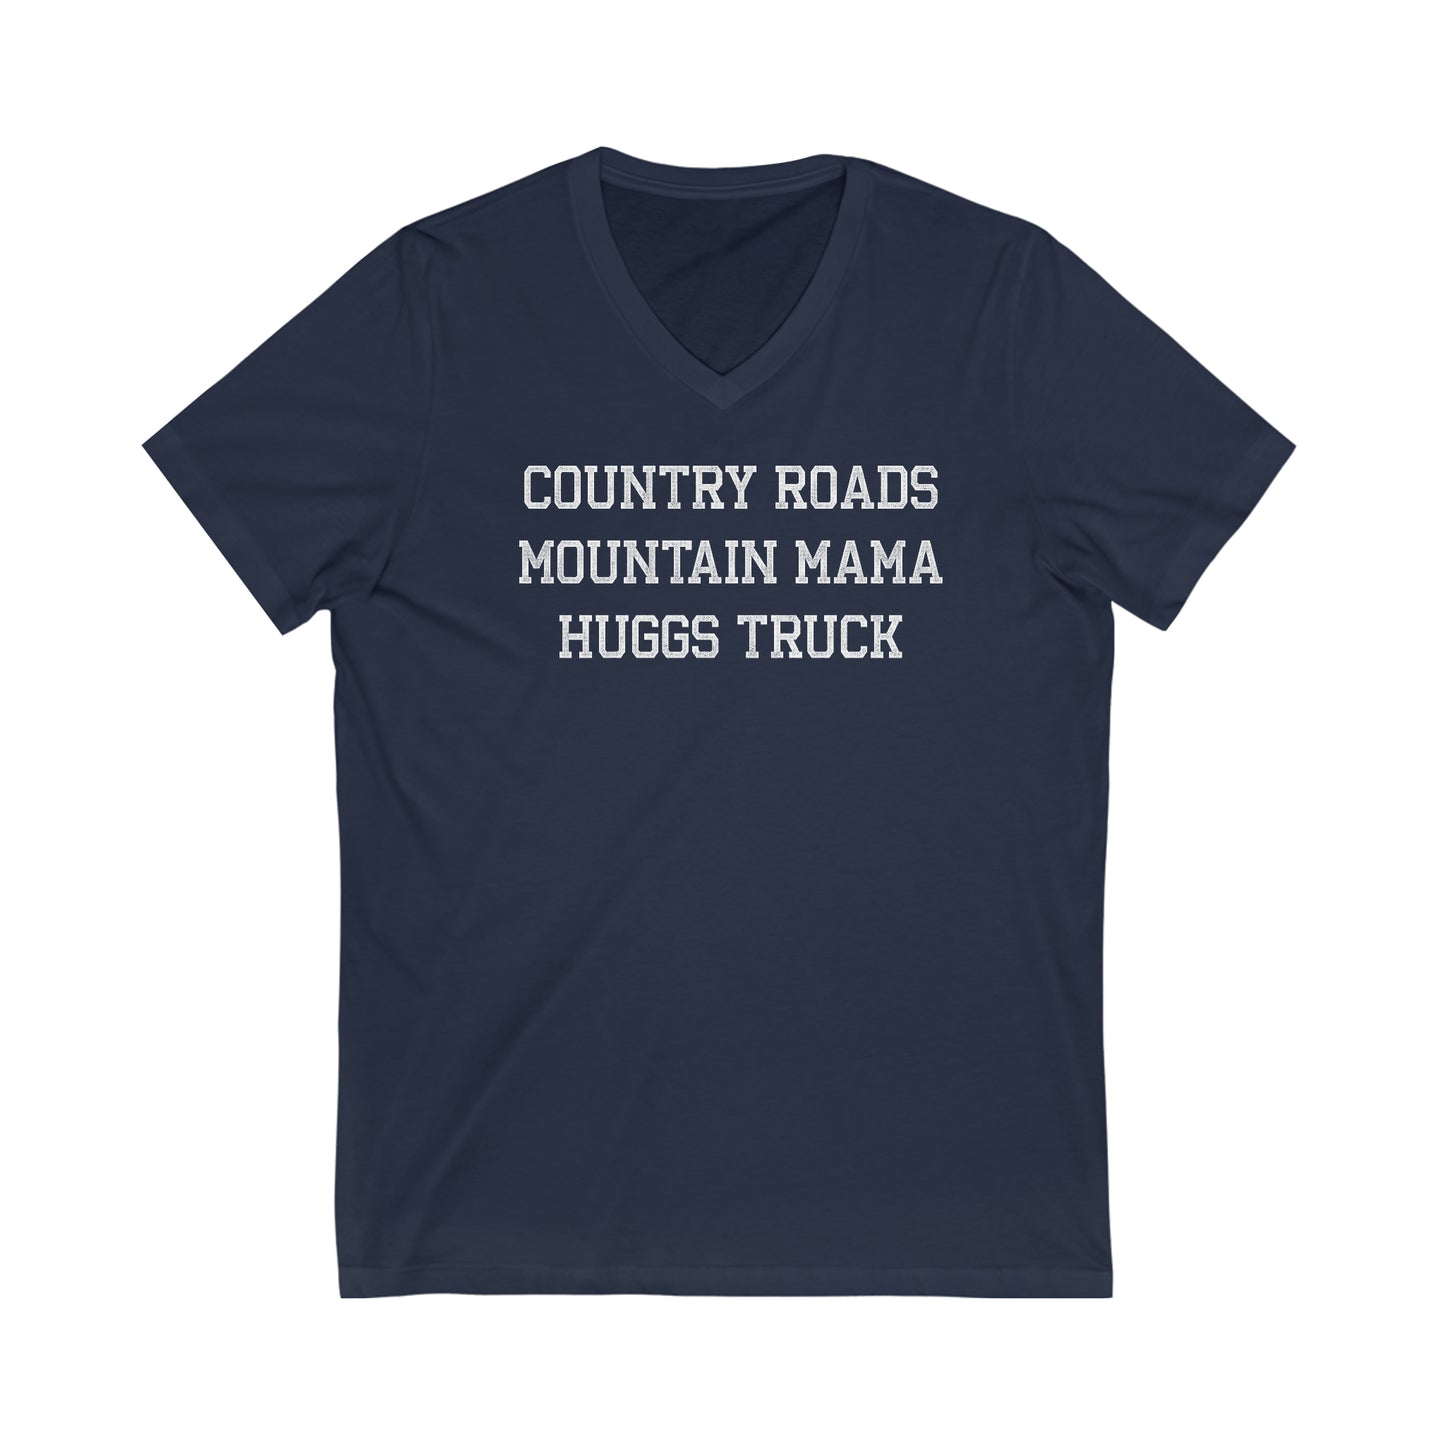 COUNTRY ROADS_MOUNTAIN MAMA_HUGGS TRUCK-Unisex Jersey Short Sleeve V-Neck Tee